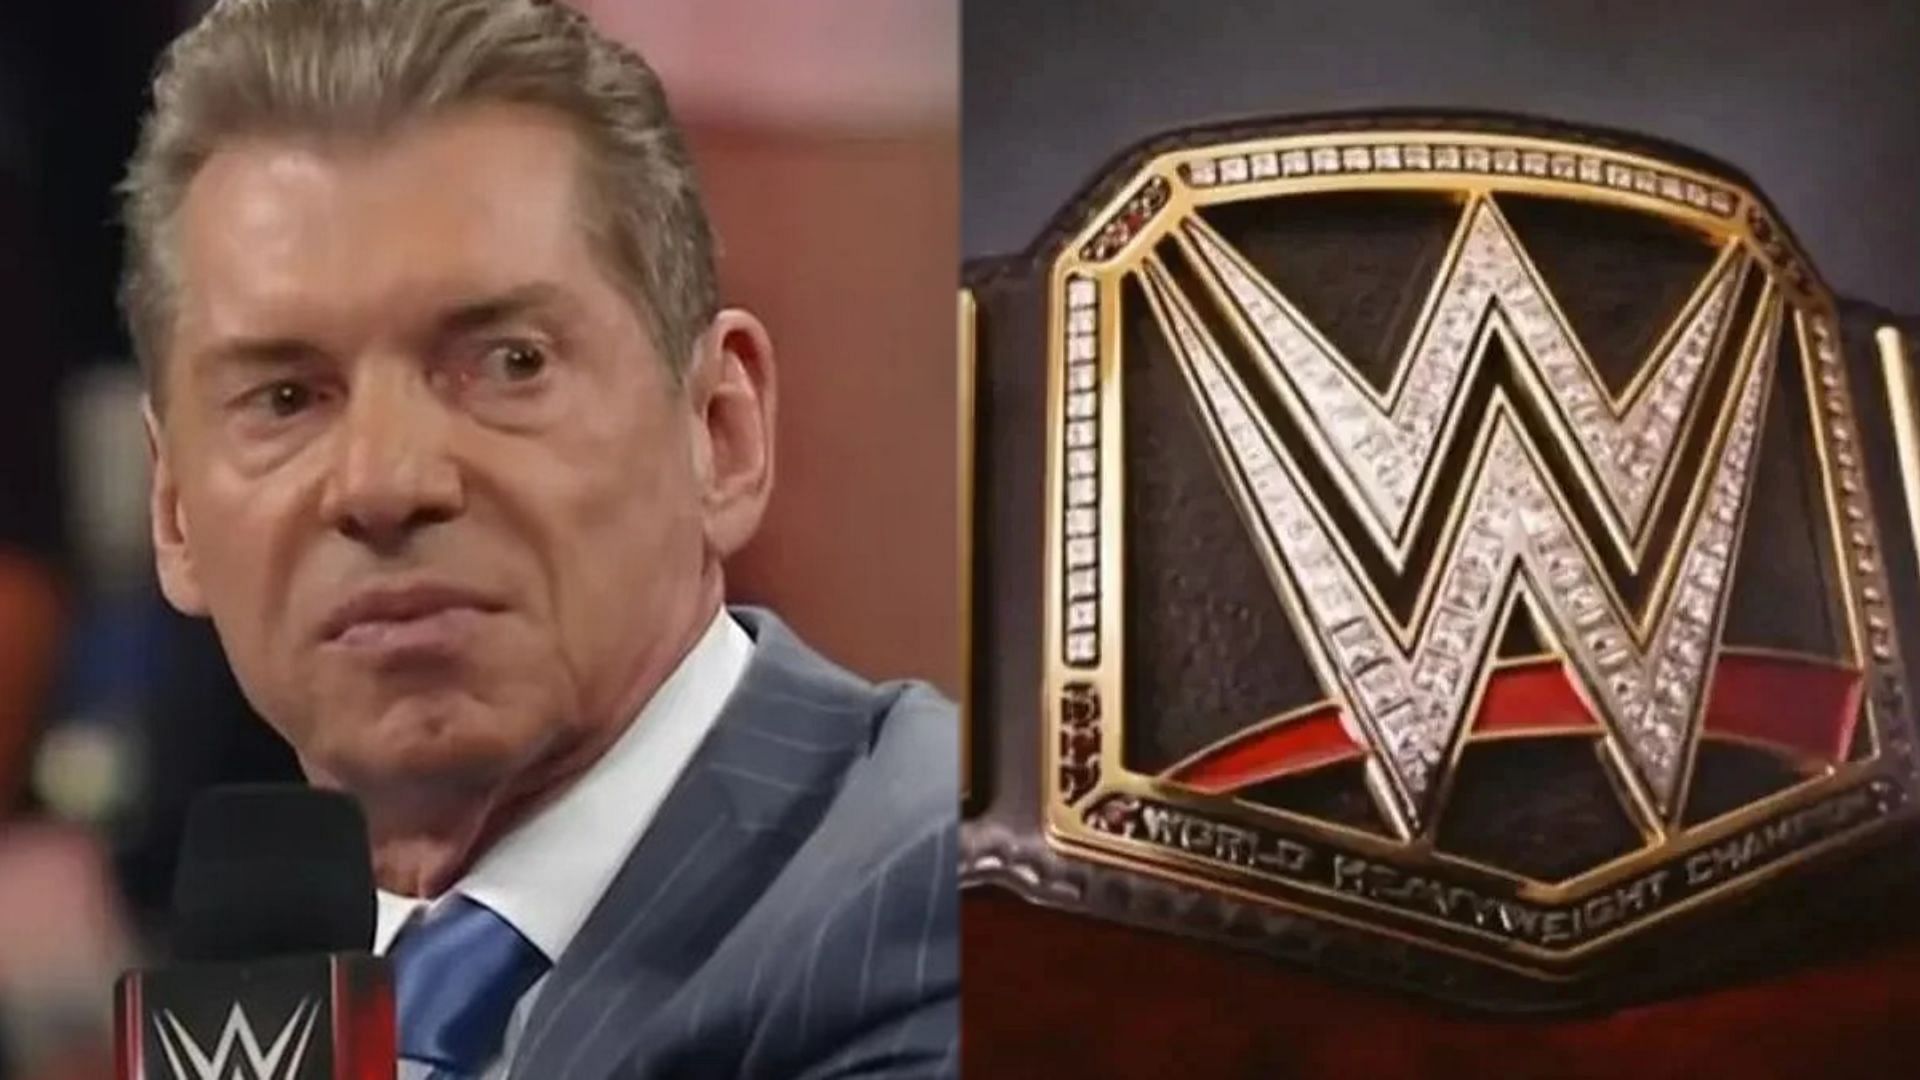 Was Vince McMahon right about his assessments on this star?